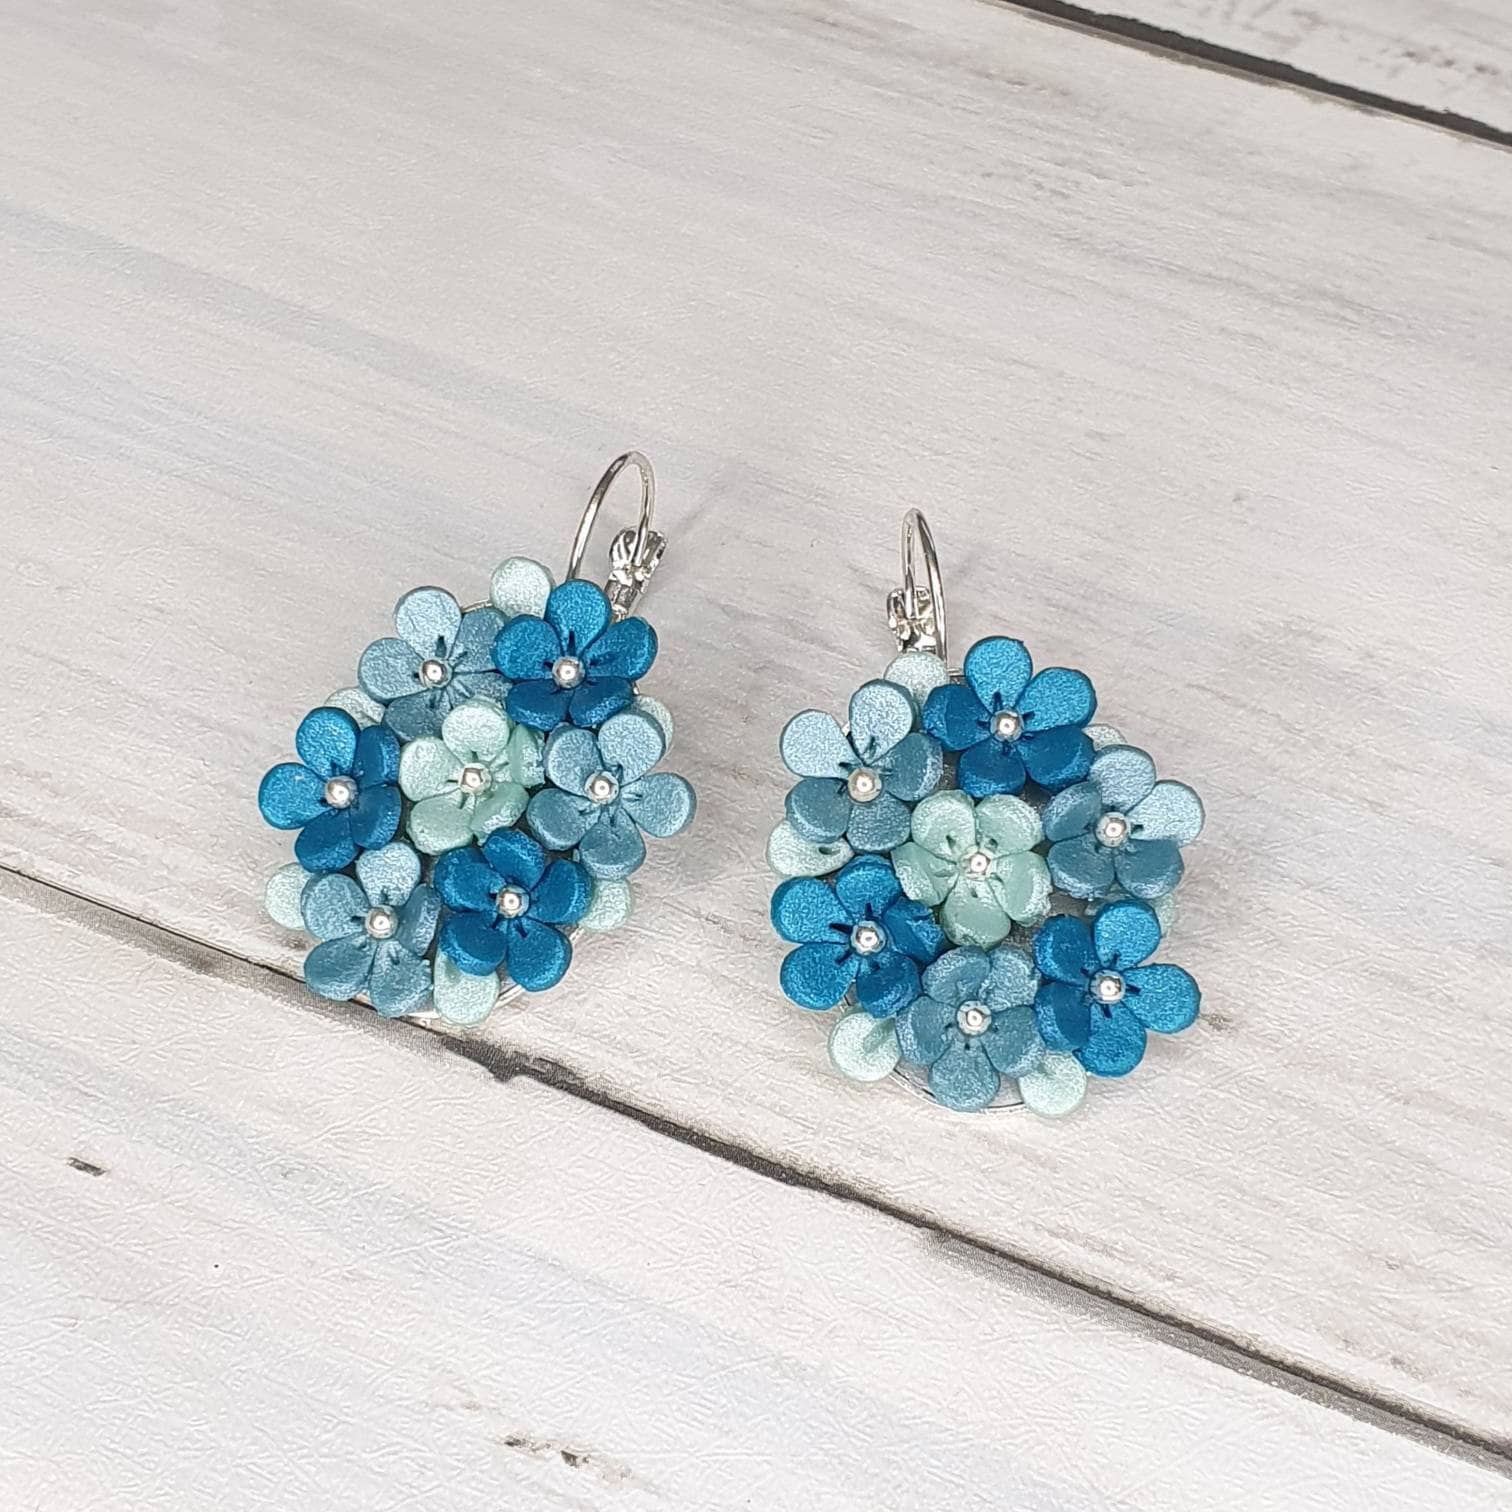 Earrings small flowers blues teal peacock blue turquoise polymer clay feminine gift for her